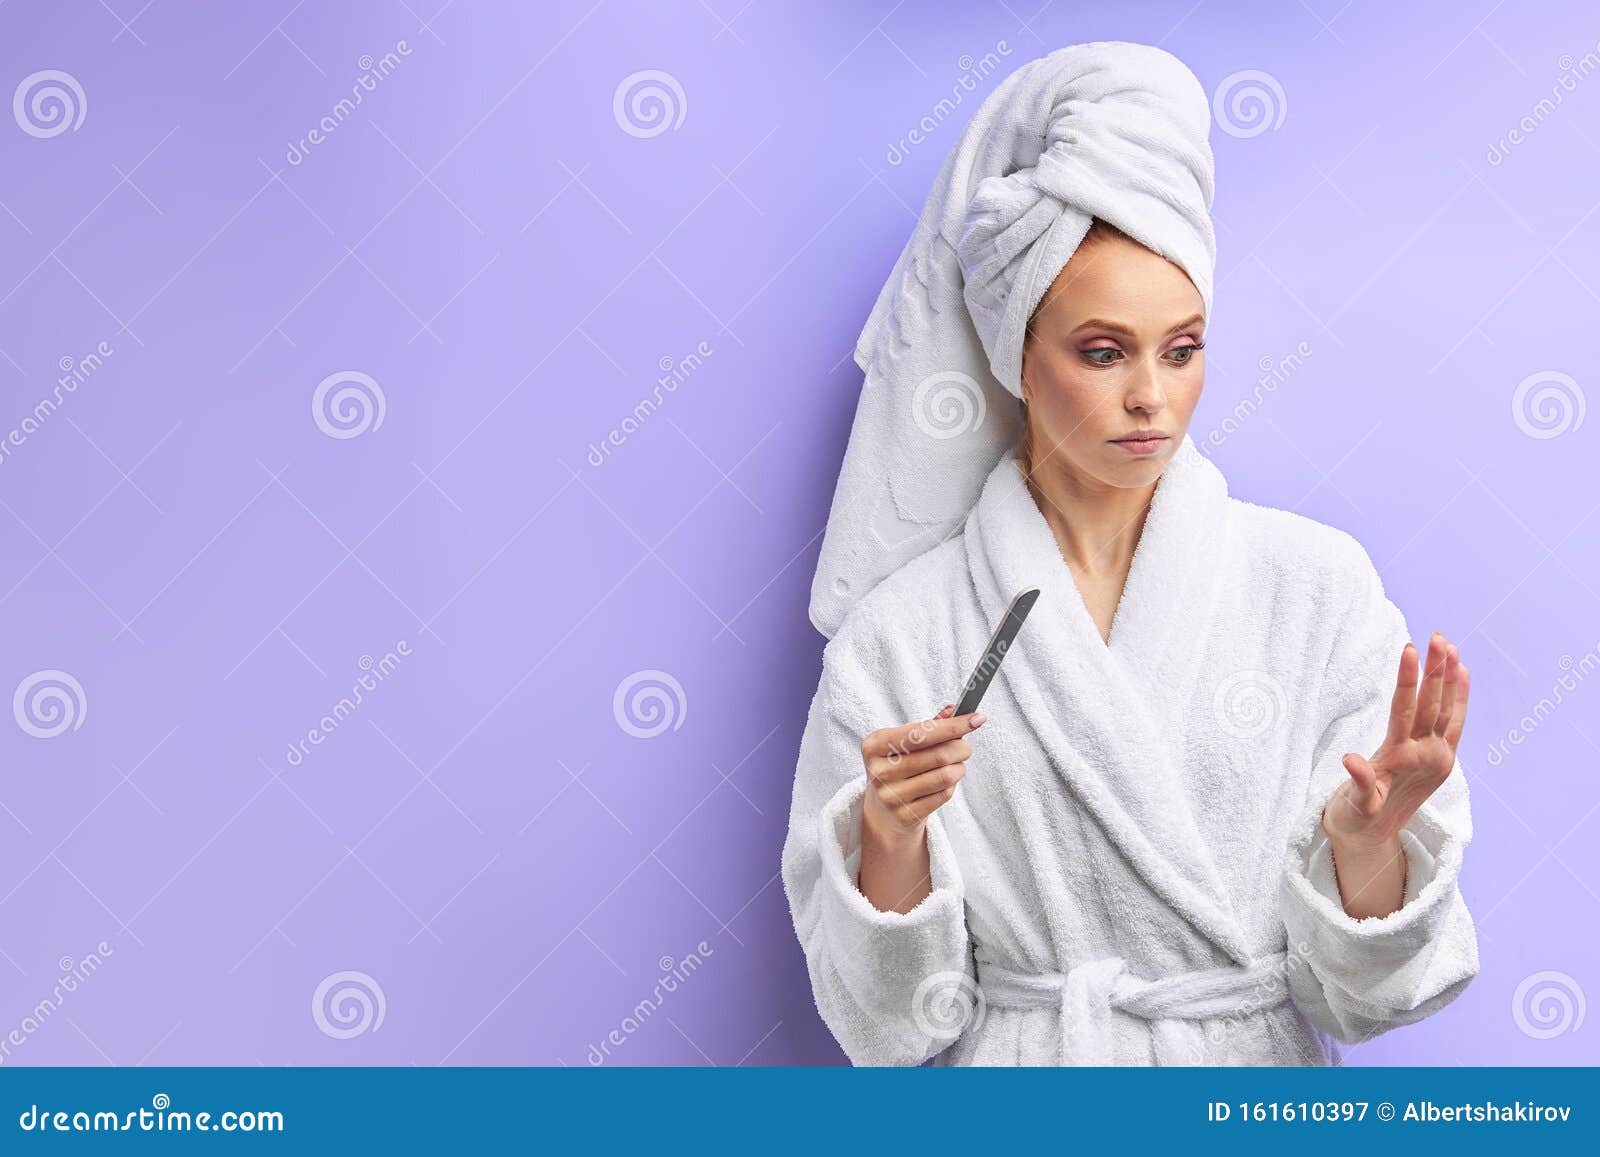 young women in bathrobe trimming nails with nailfile